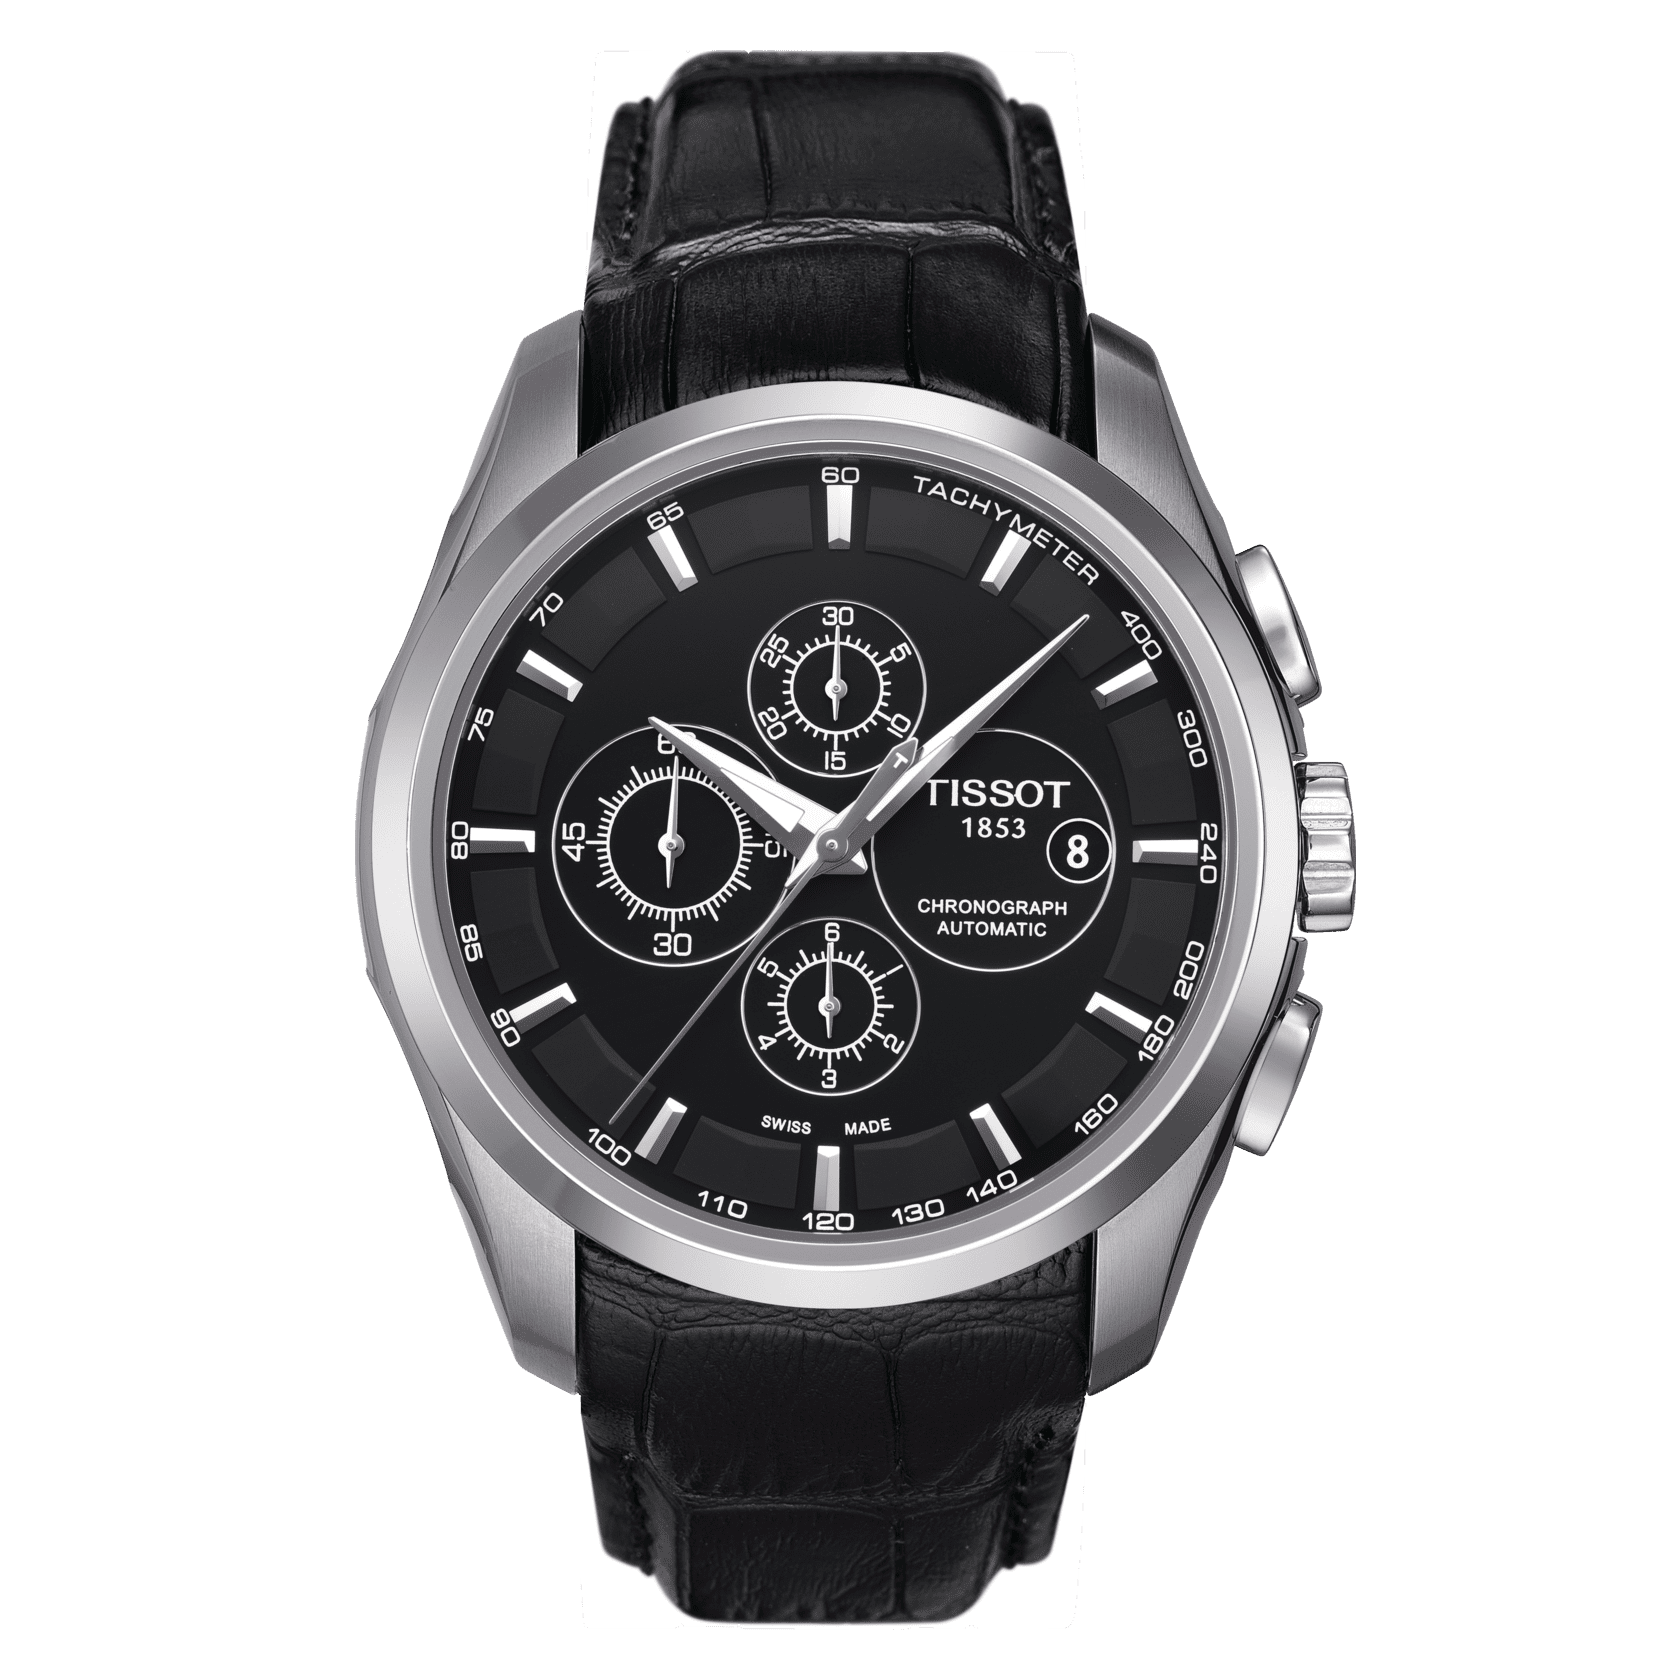 The Best Replica Watch Sites Reviews